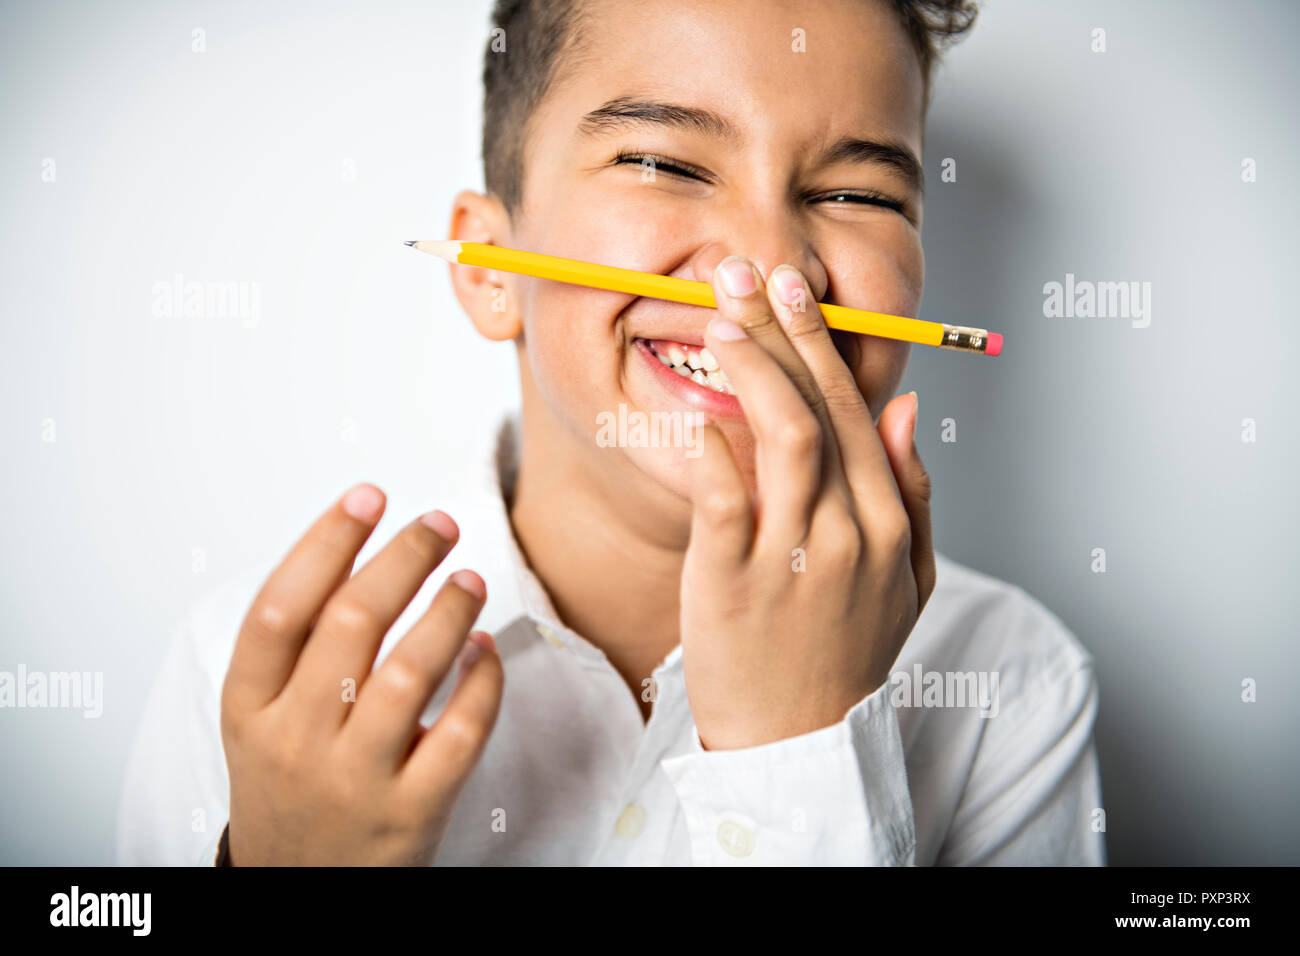 Black boy holding school pensil and take it on his nose Stock Photo